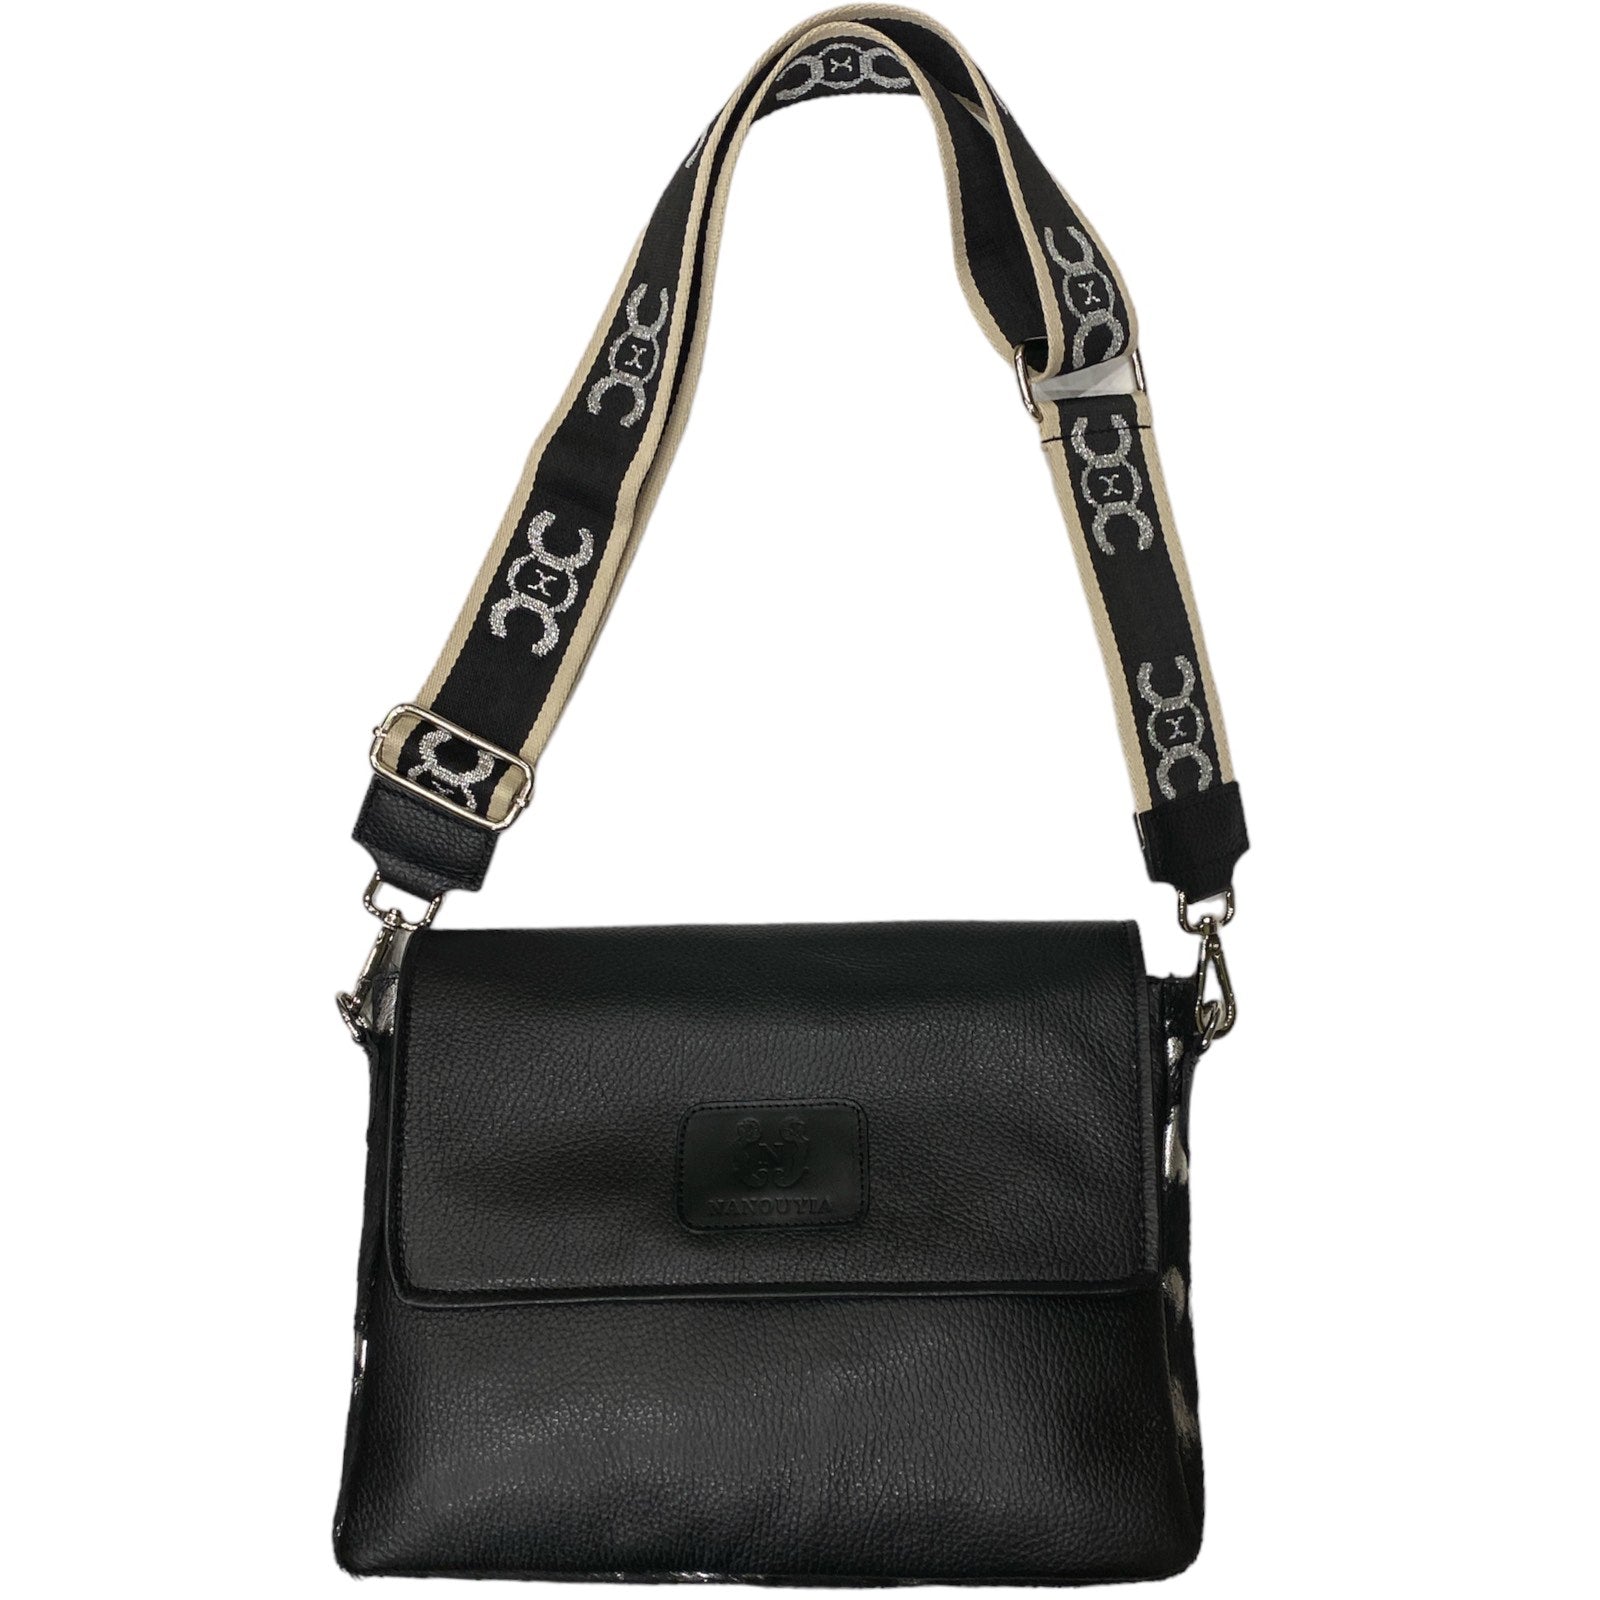 MANDY. BLACK LEATHER WITH ART SILVER SIDES STATEMENT BAG